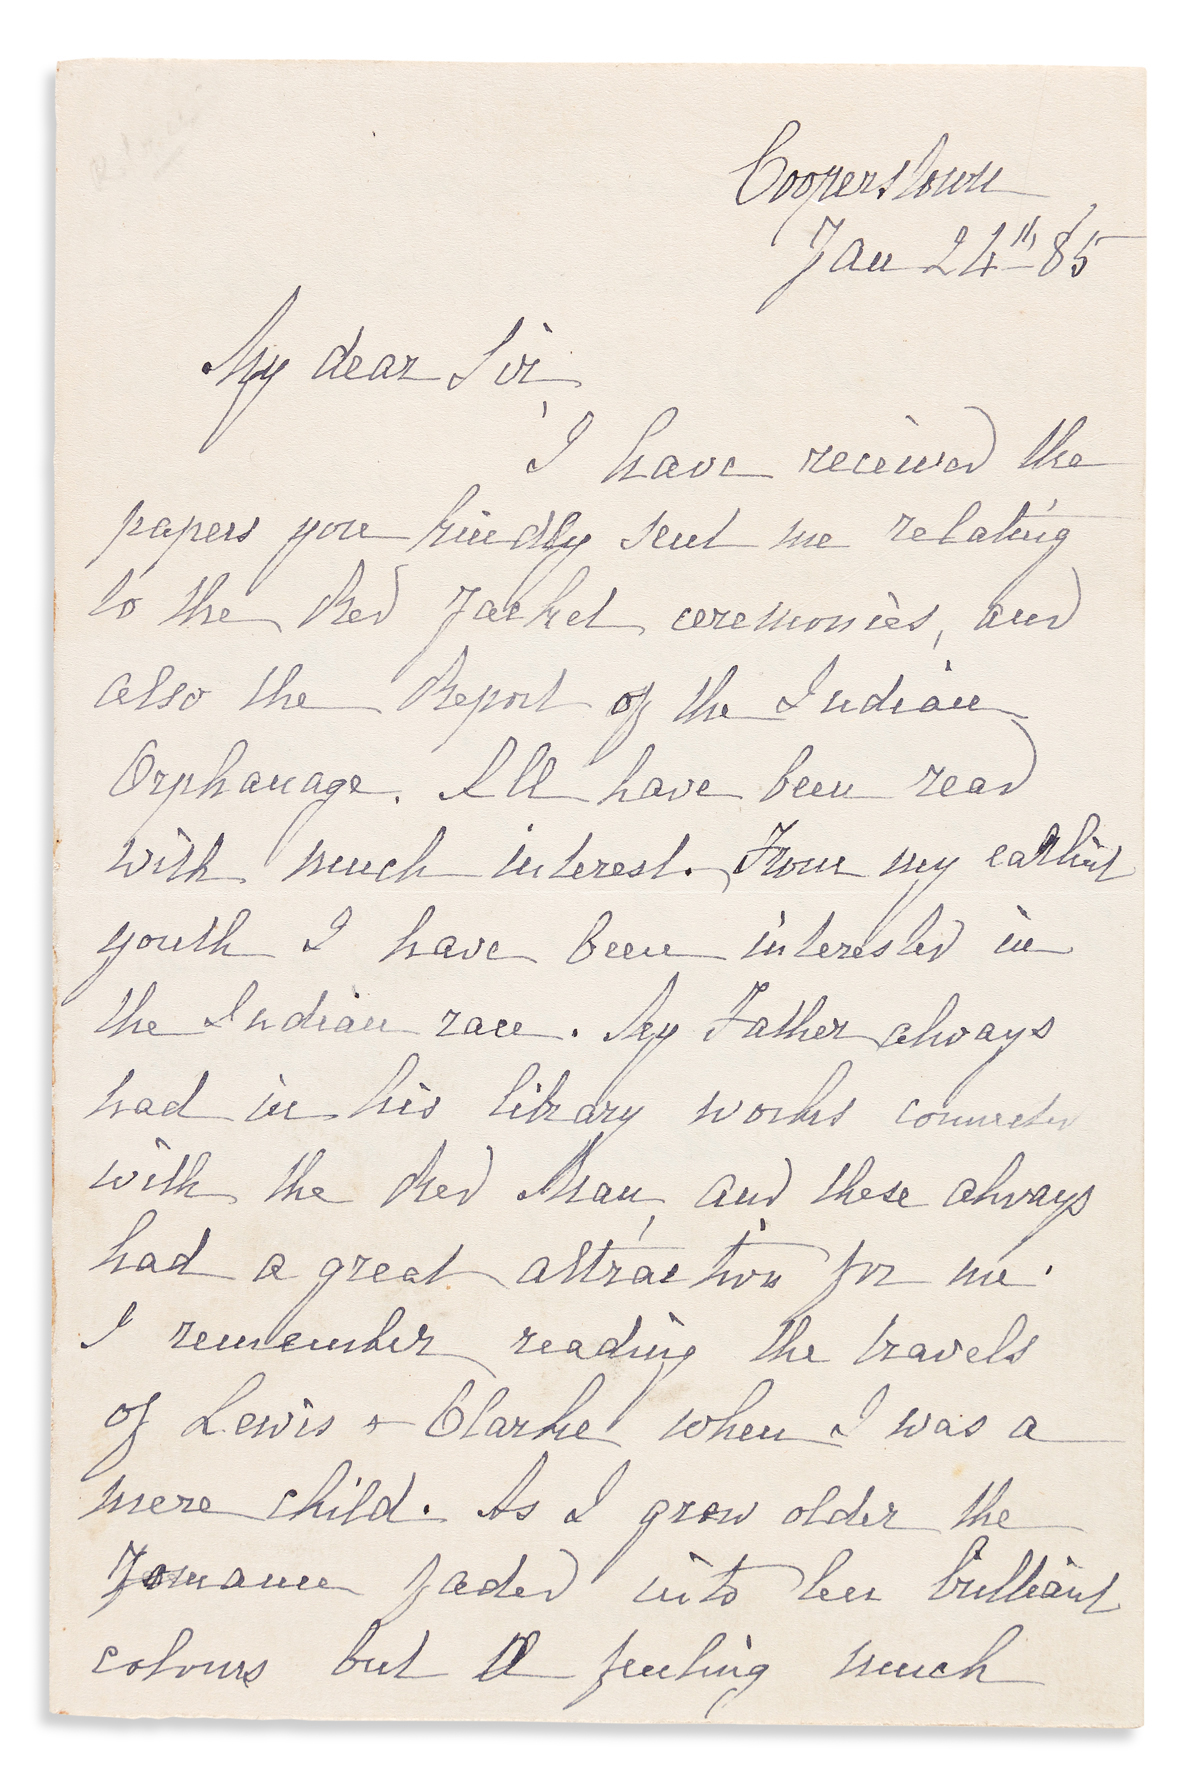 Cooper, Susan Fenimore (1813-1894) Autograph Letter Signed, 24 January 1885.